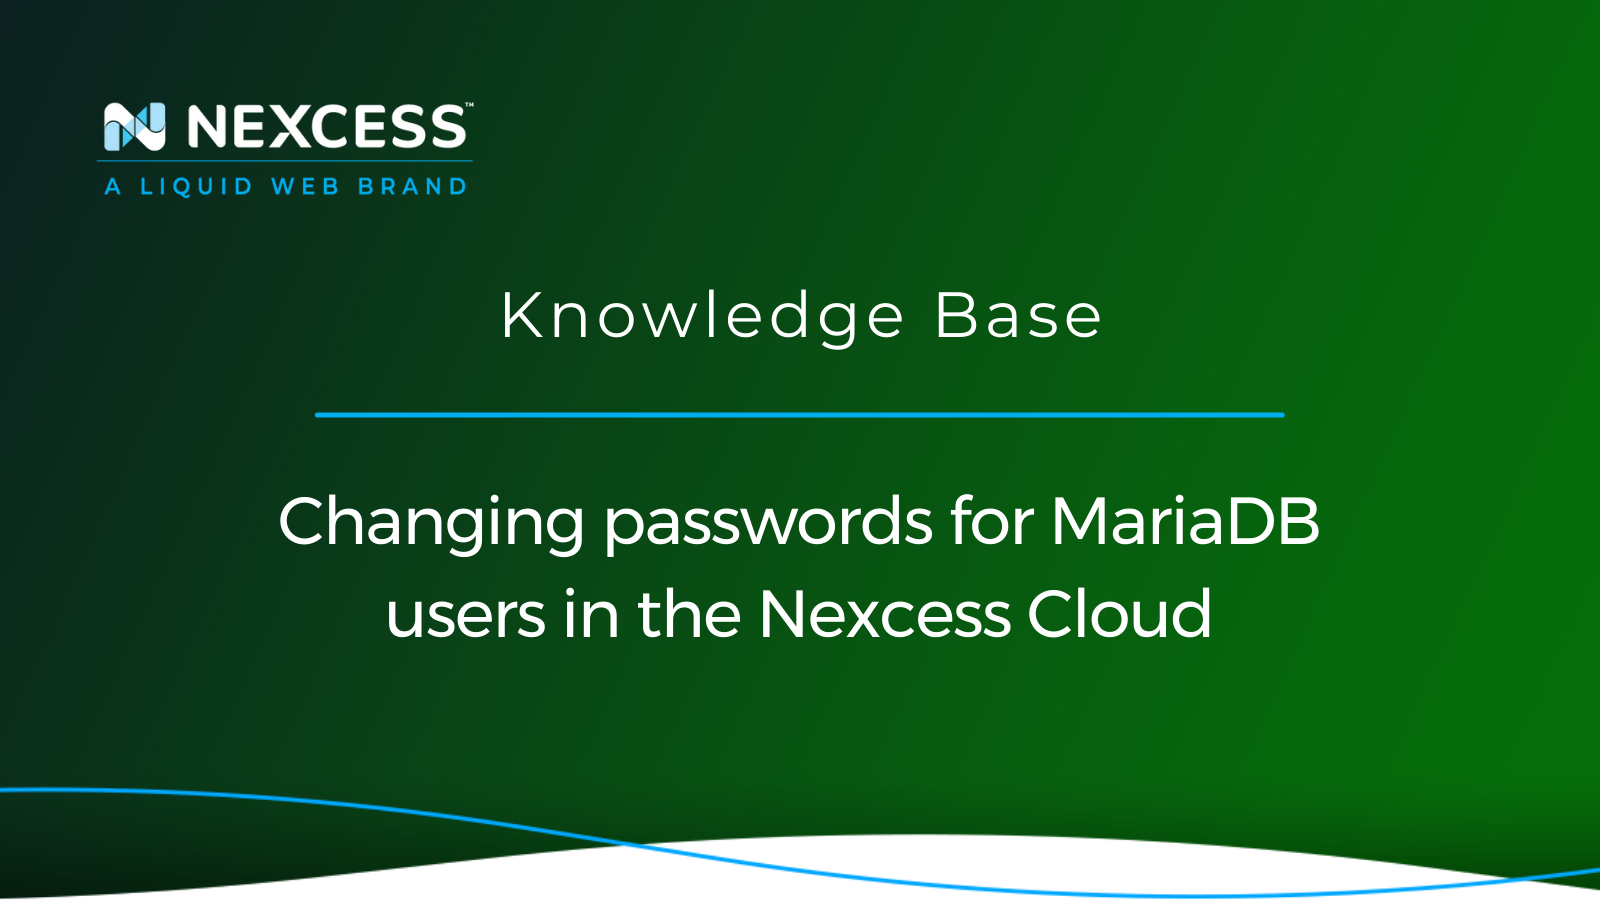 Changing passwords for MariaDB users in the Nexcess Cloud